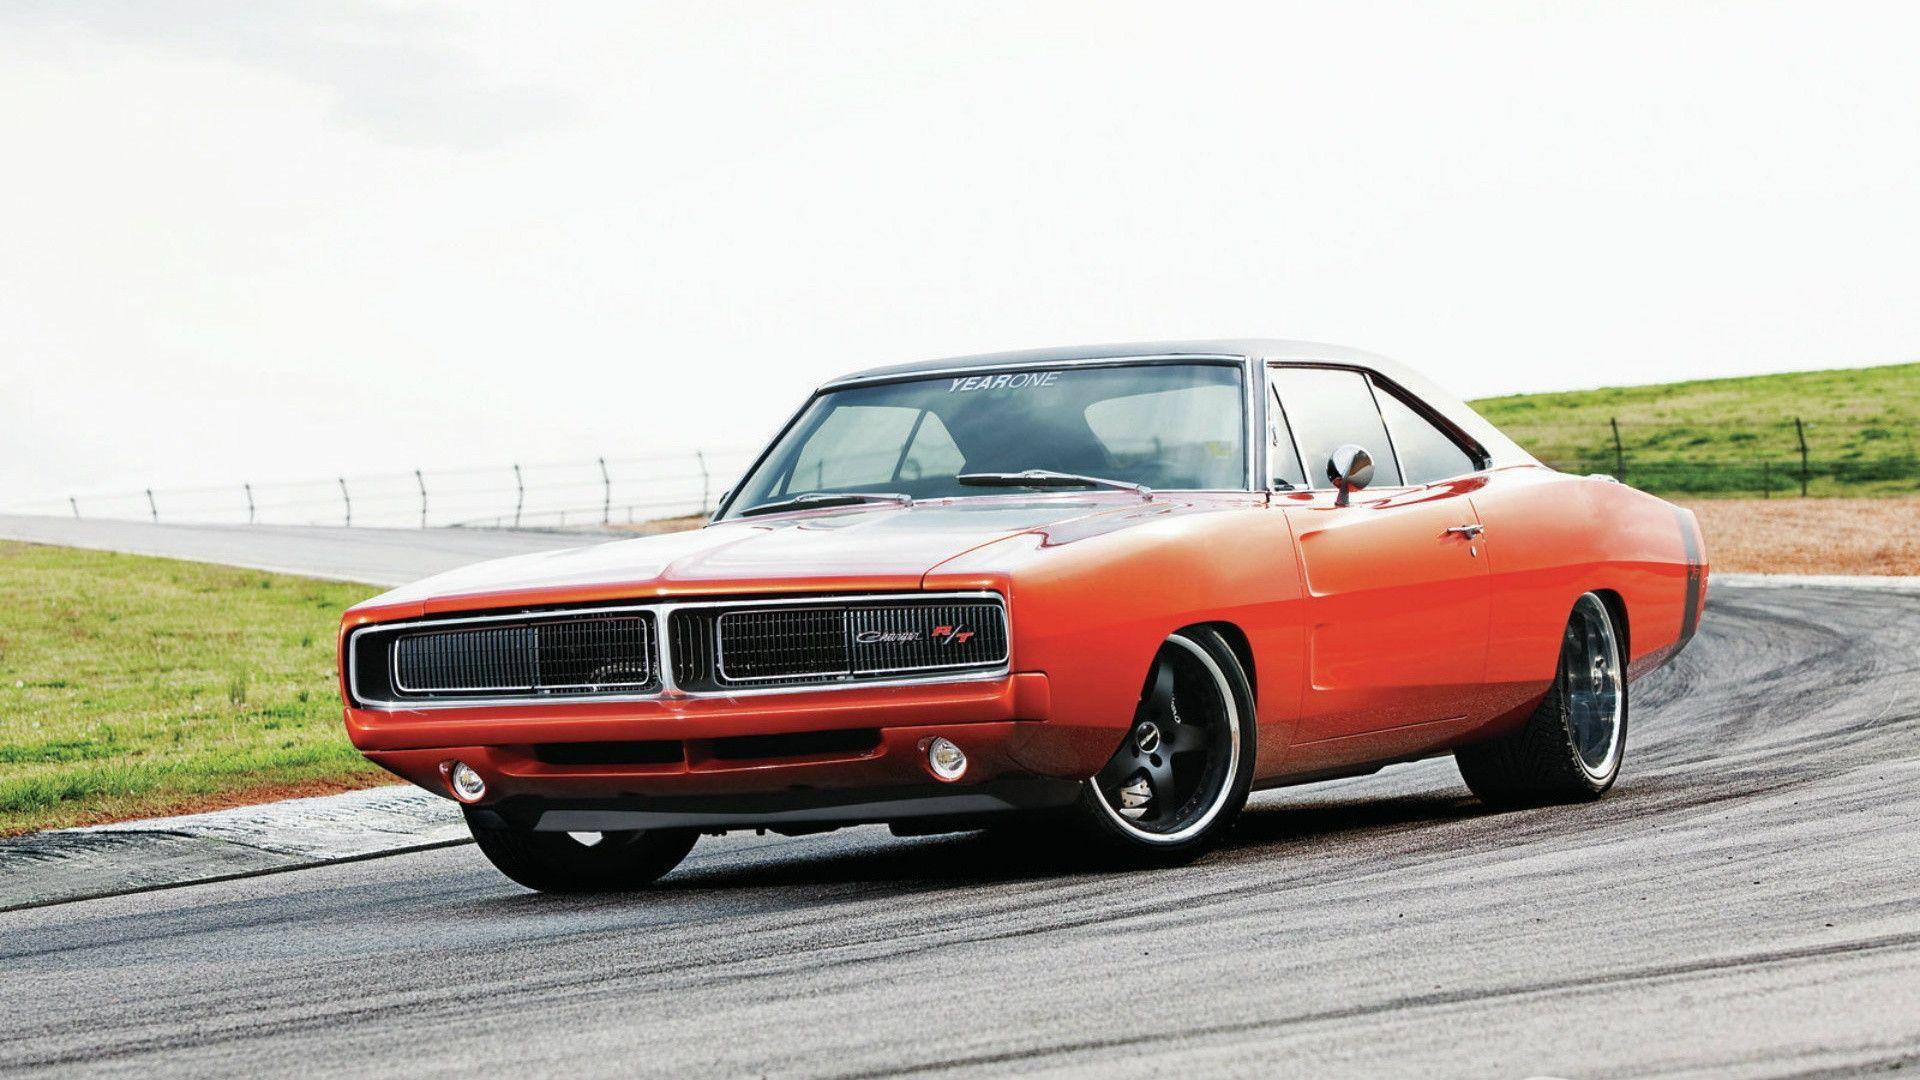 Wallpaper  1969 Dodge Charger R T car Forza Horizon 4 video games  Charger RT 1920x1080  calliopeiamoon  1786459  HD Wallpapers  WallHere